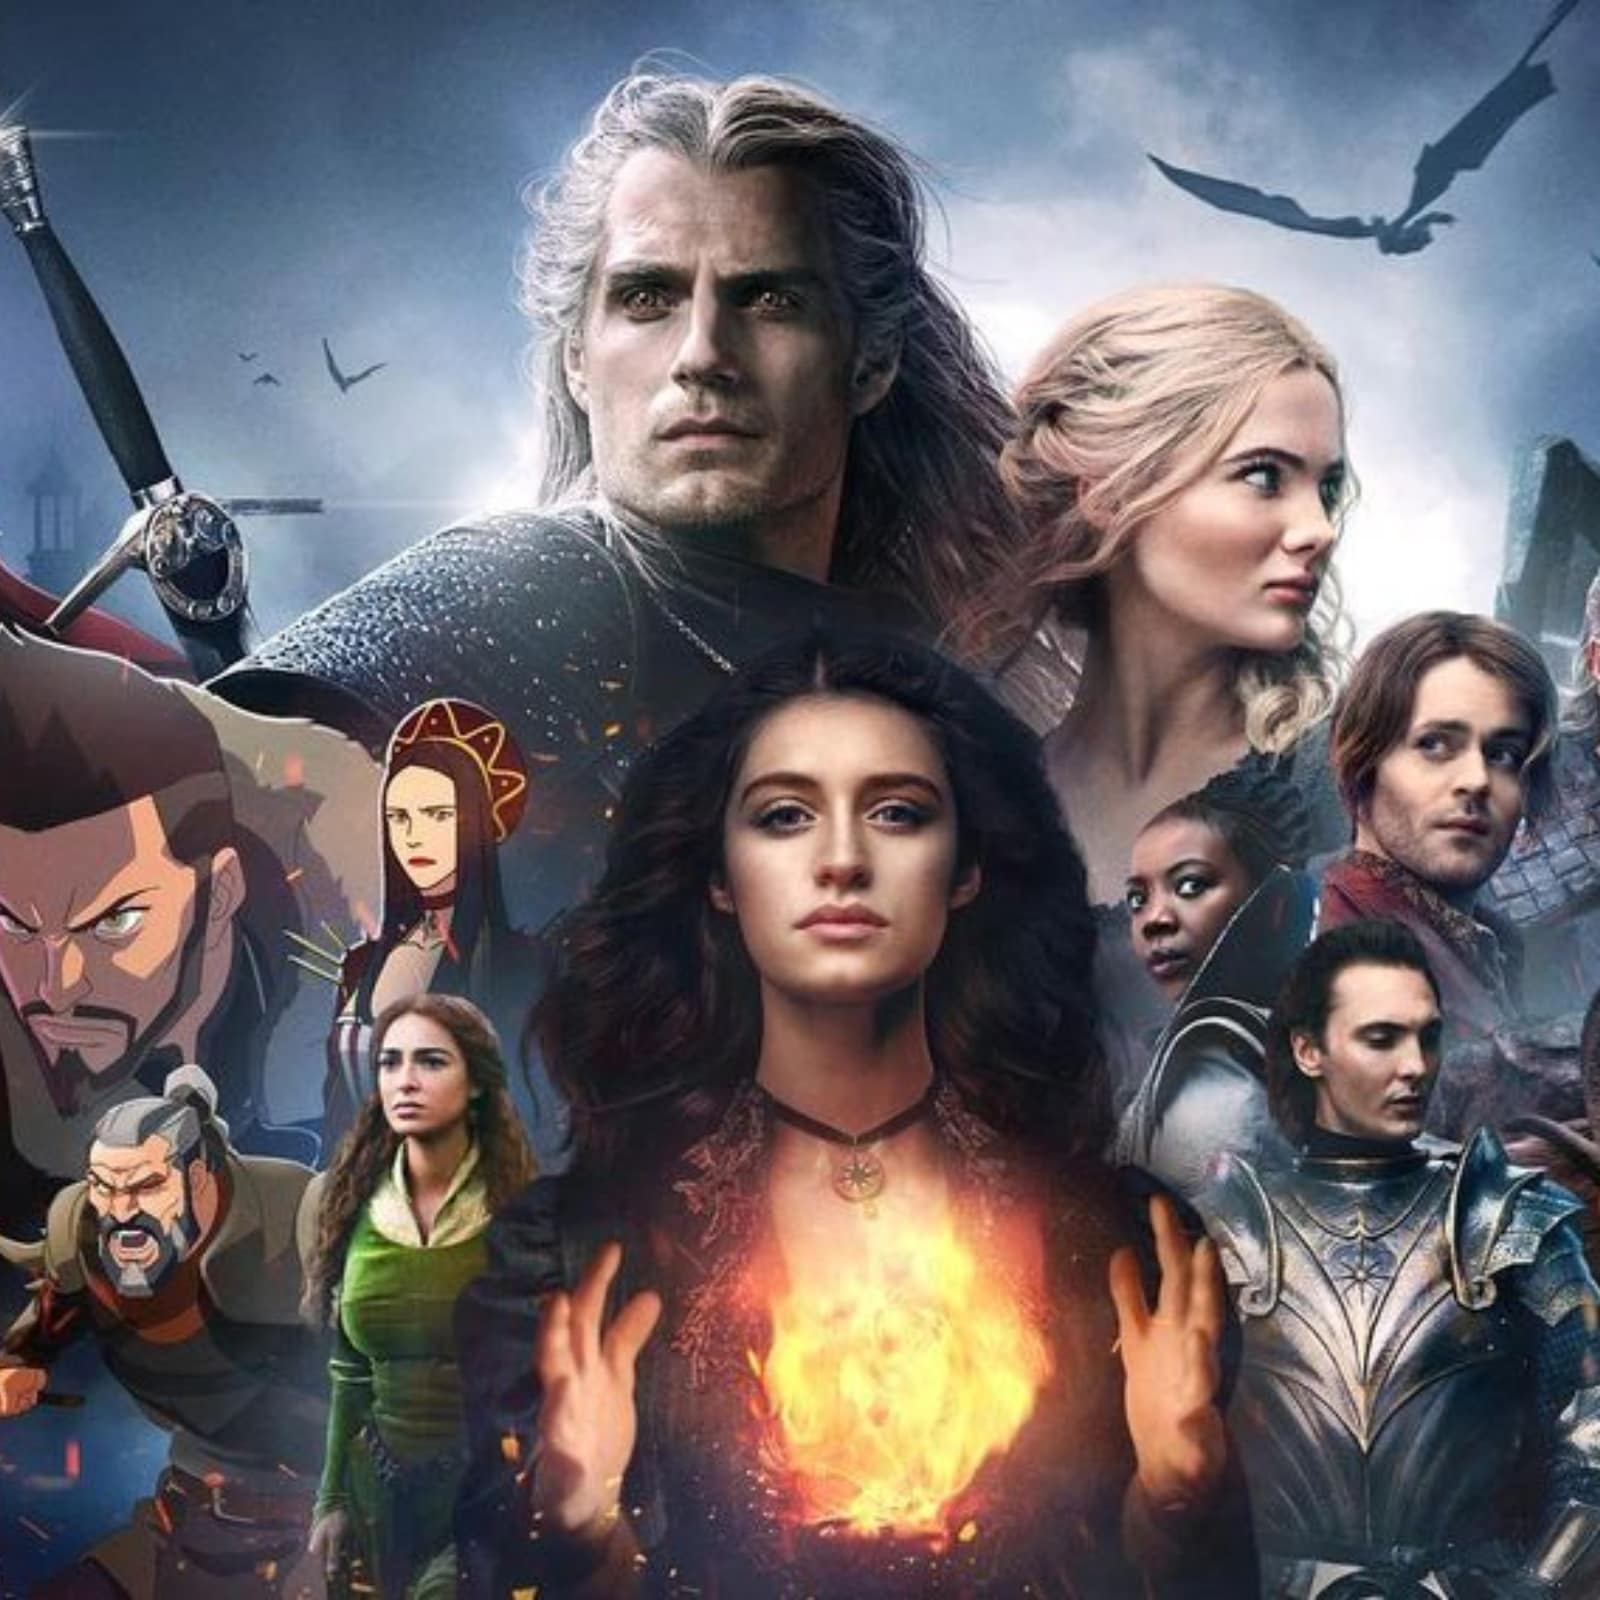 The Witcher season 3 poster unveiled